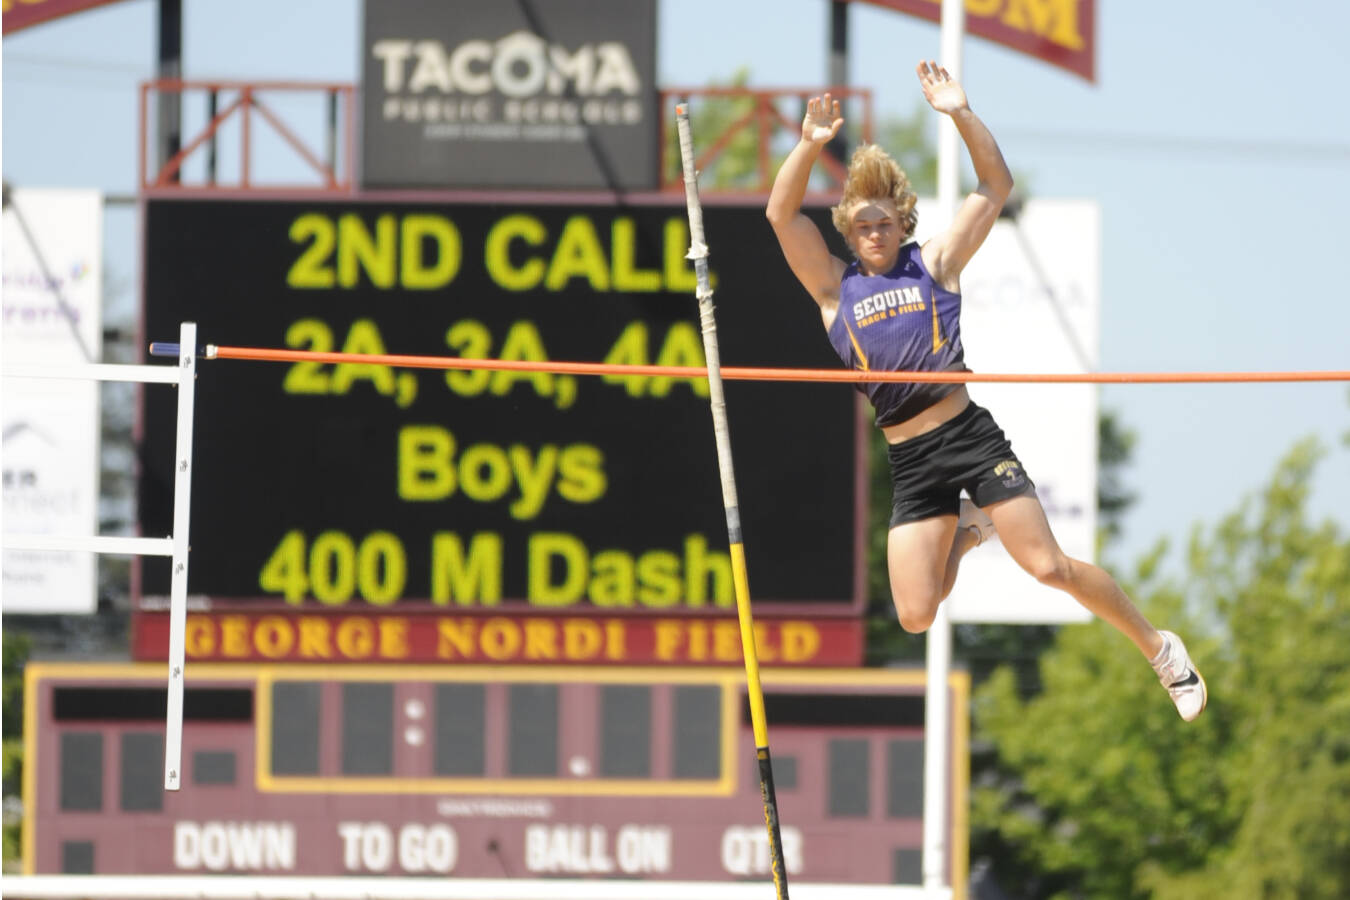 Sequim’s Mirek Skov finished second in the pole vault with a height of 14 feet, 0 inches at the state 2A track and field championships held Saturday in Tacoma. (Michael Dashiell/for Peninsula Daily News)